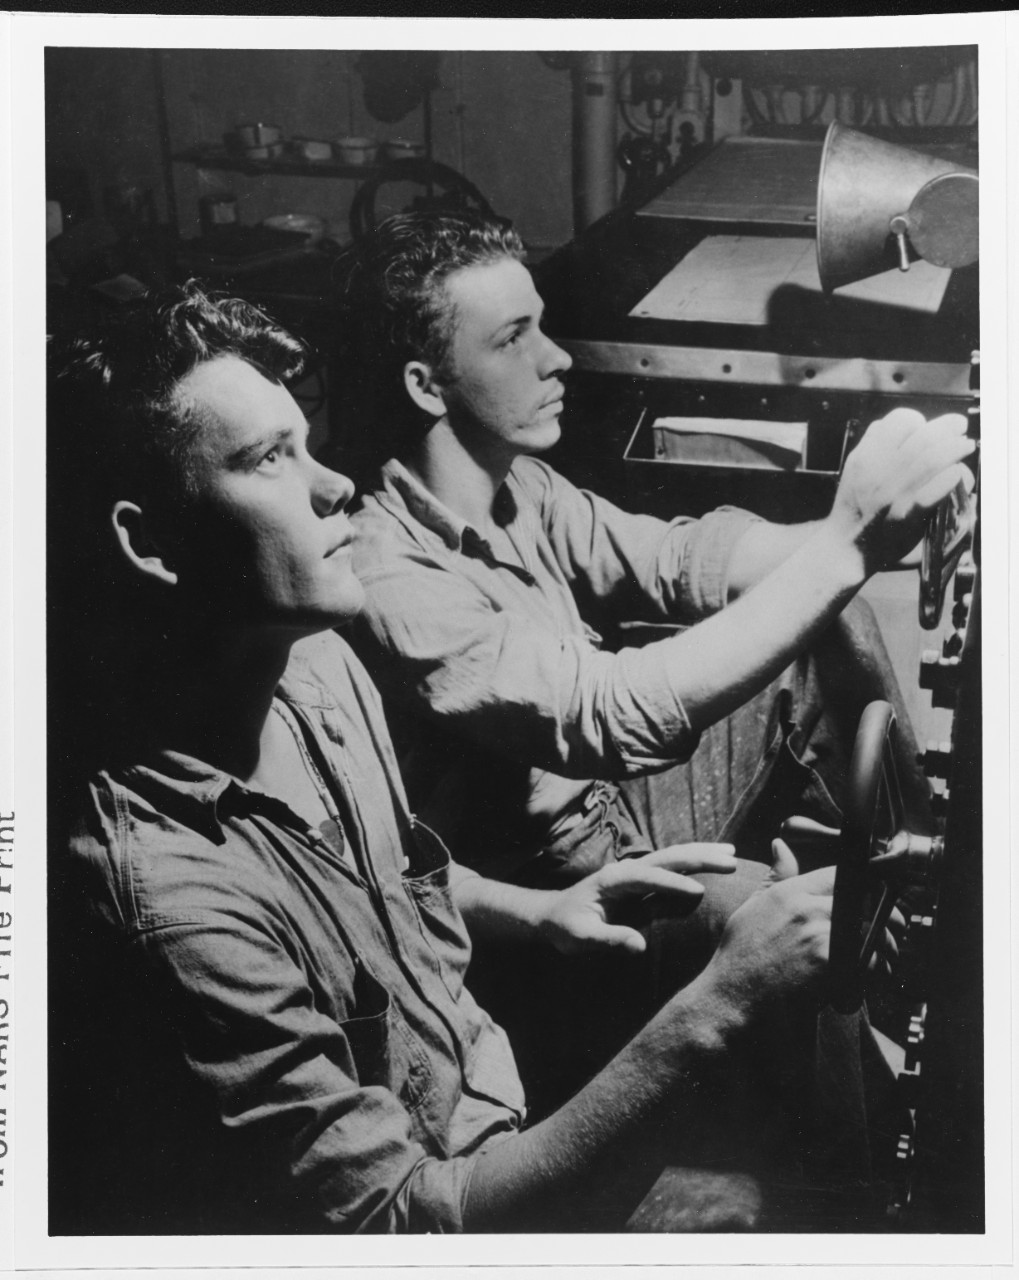 Crewmen Morton Herman and Oswald Pawekkobf watch the "OC" during a submarine chase on 9-10 May, 1942.  Original caption states: "this instrument detects submarines in a manner probably unknown to the enemy". 